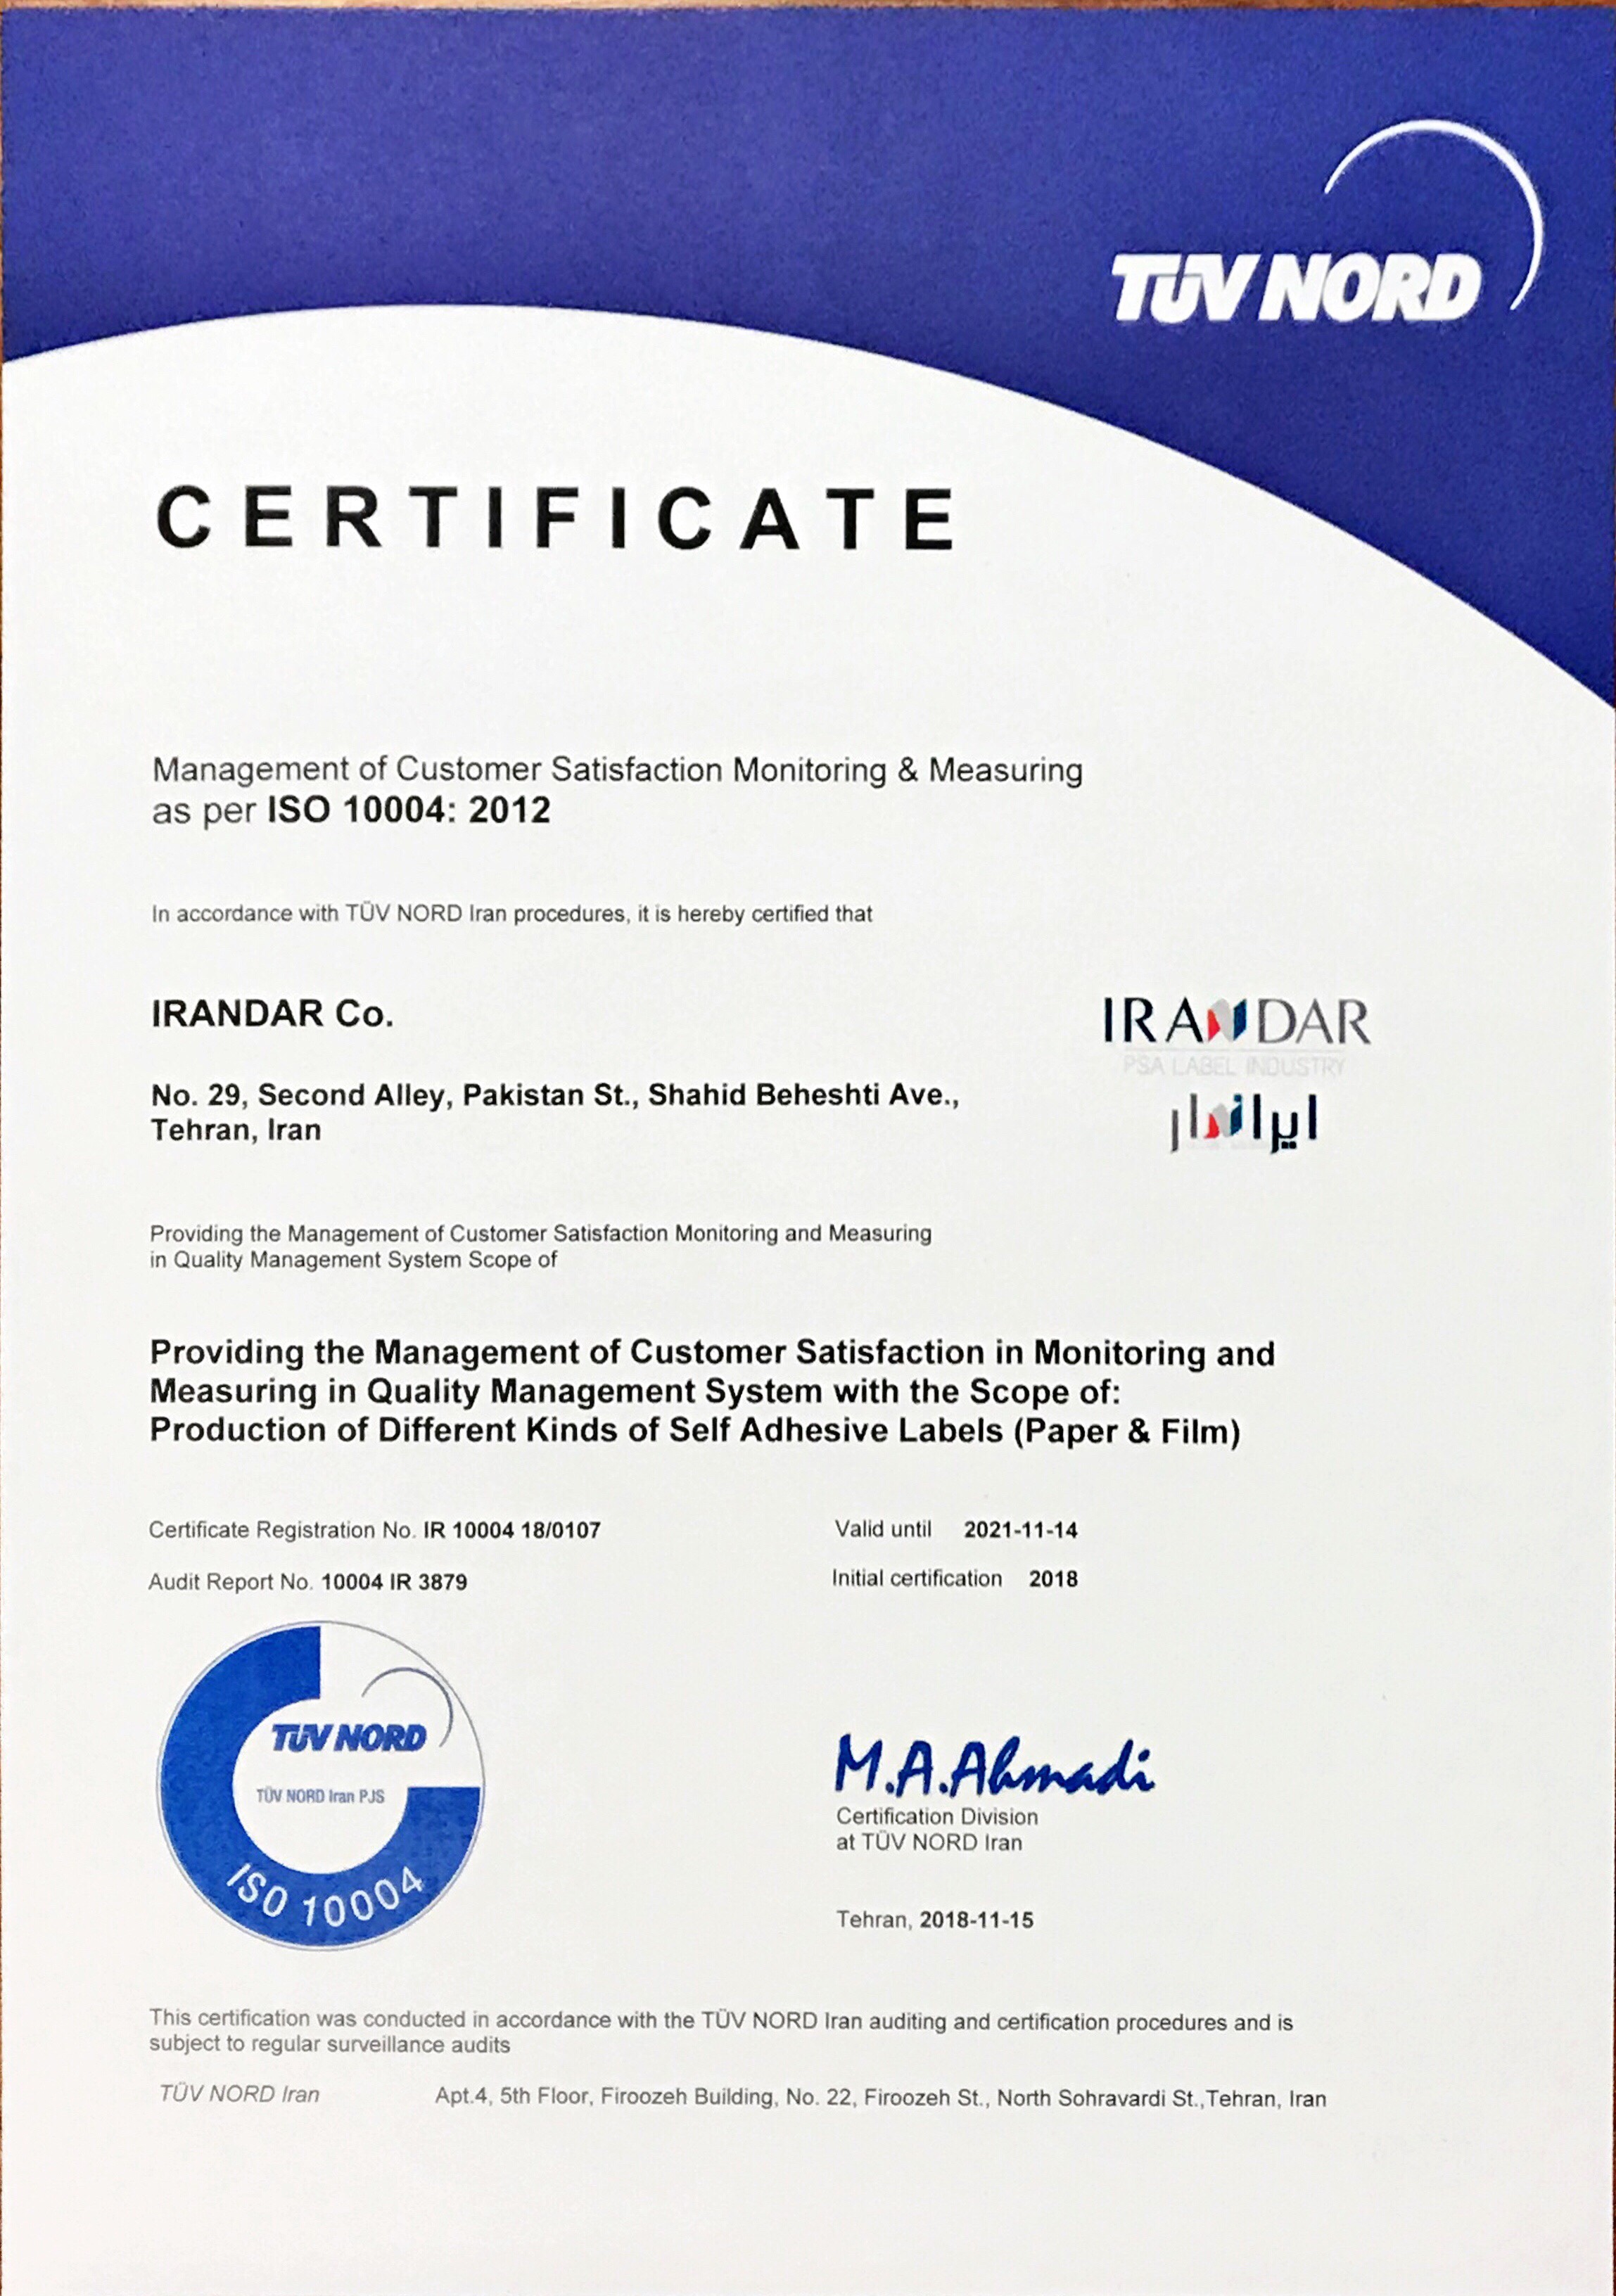 Standards of Monitoring and Measuring Customer Satisfaction ISO 10004: 2012